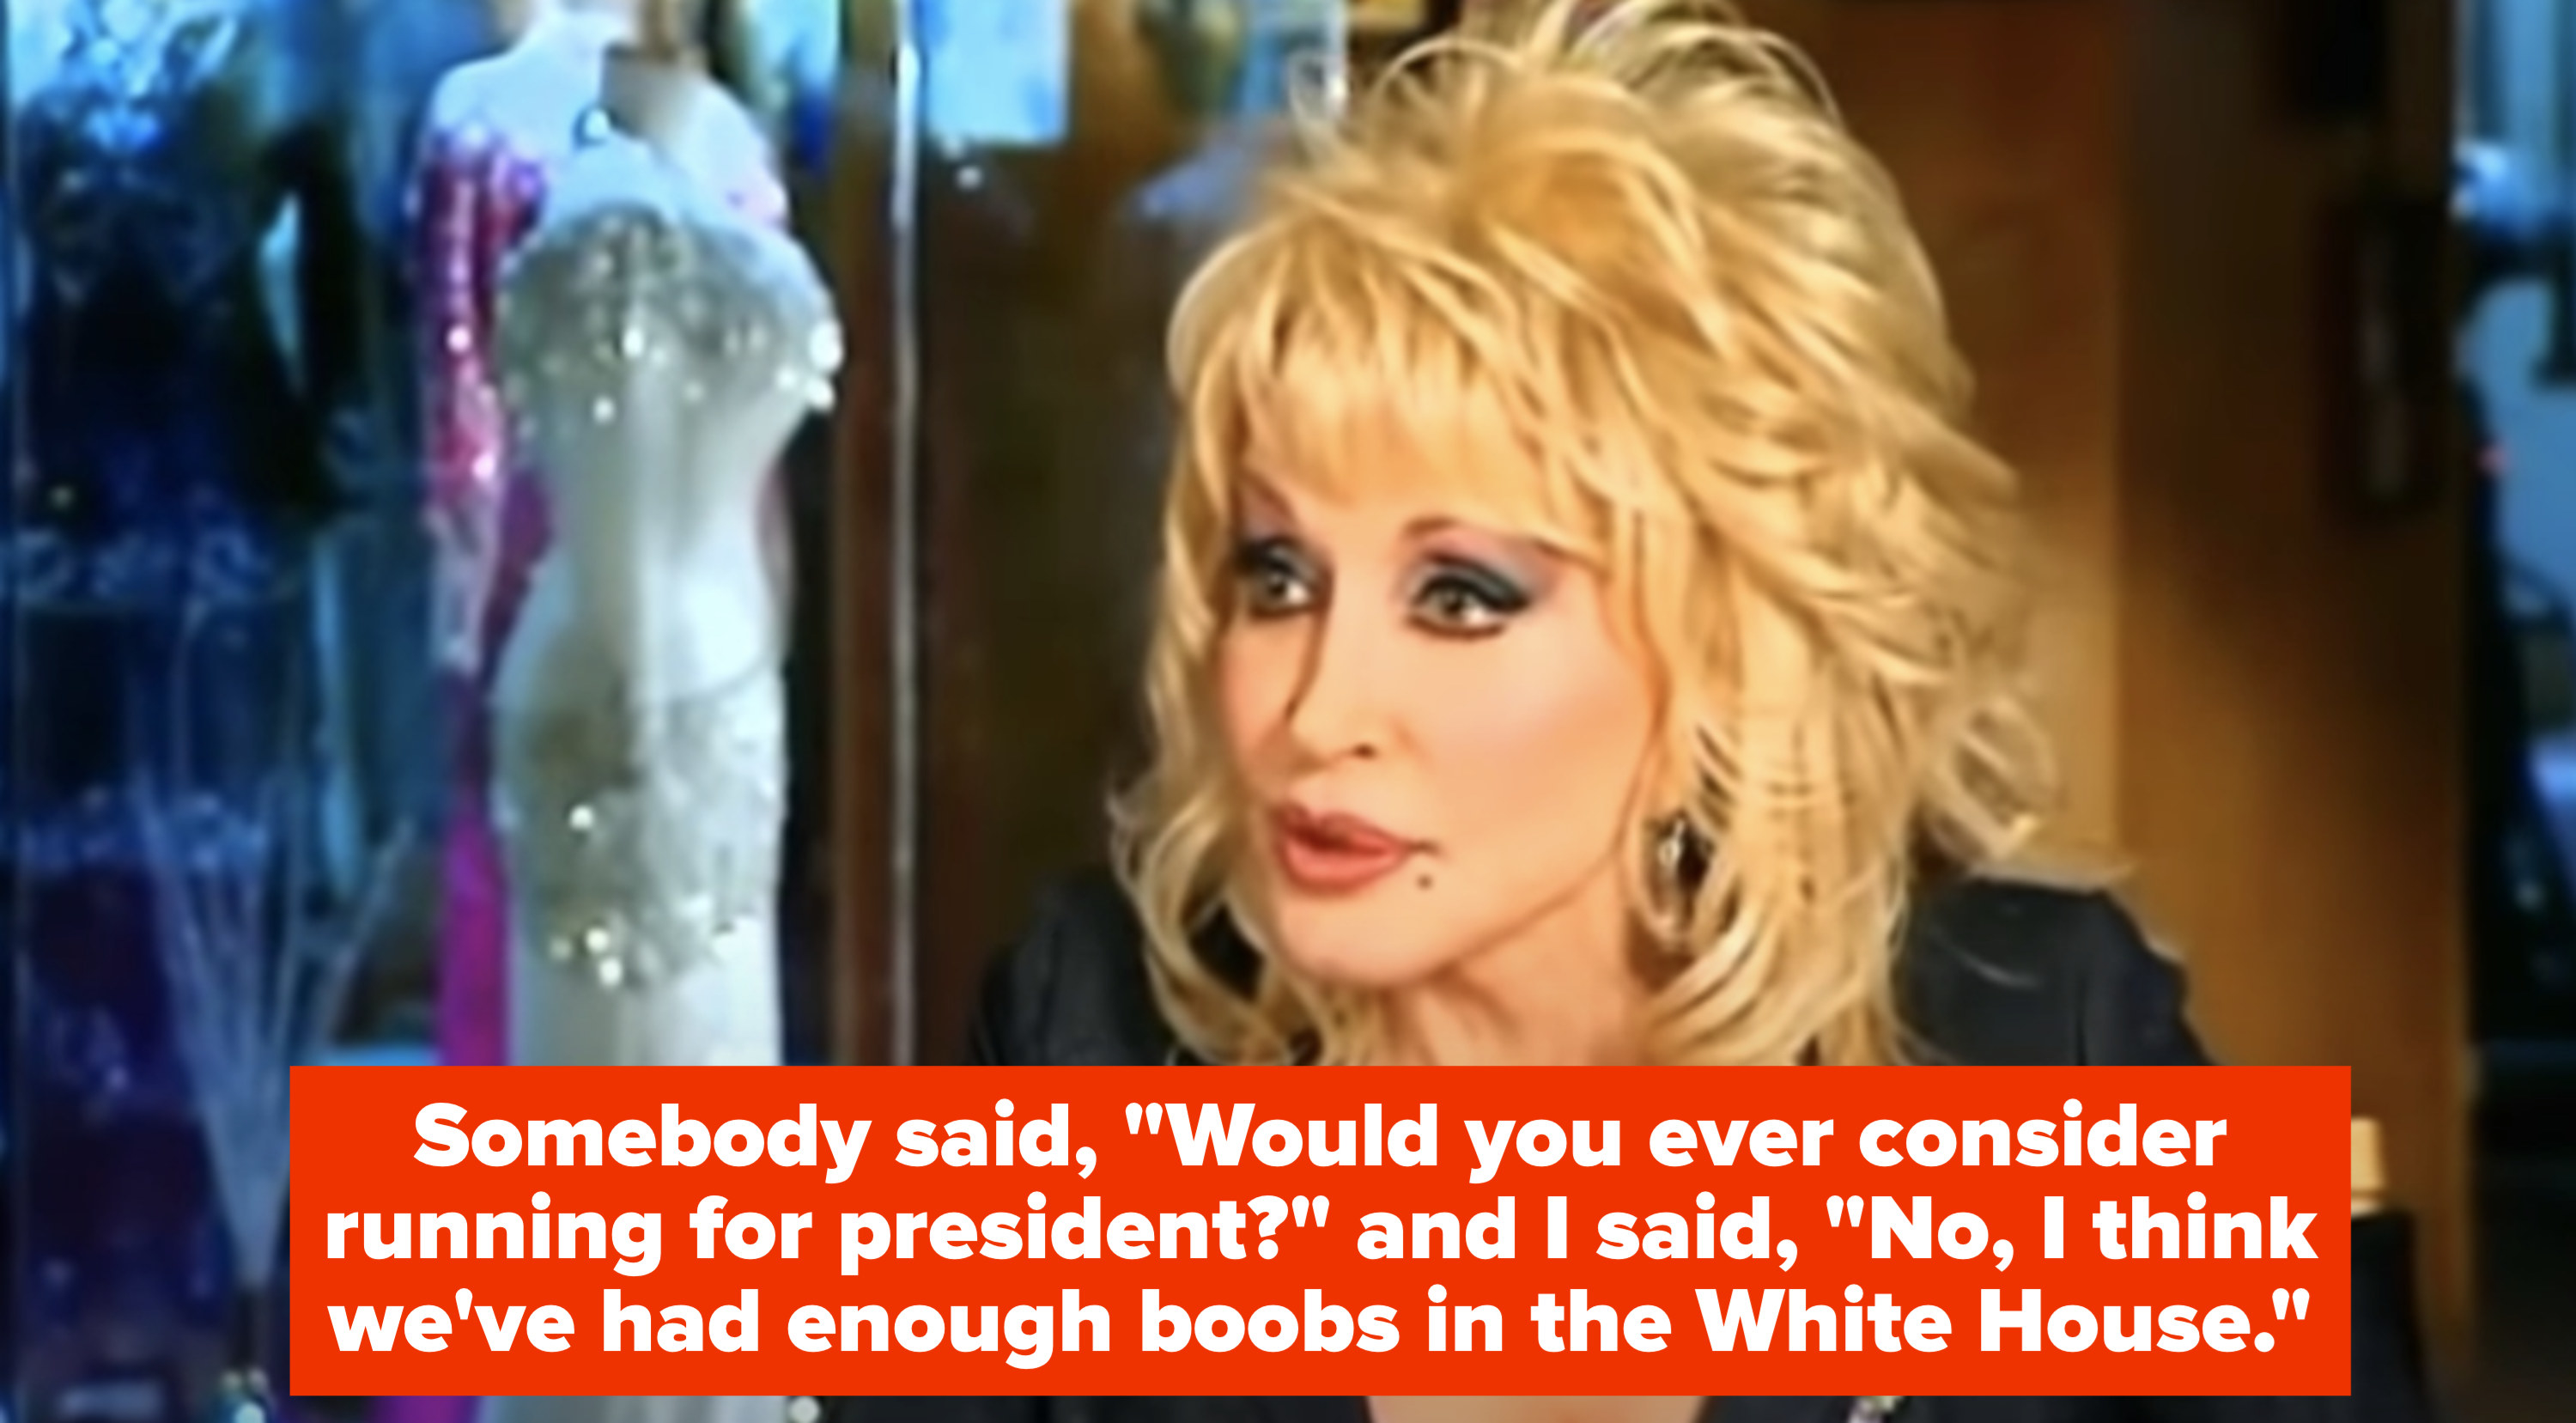 Dolly: &quot;Somebody said: &#x27;Would you ever consider running for president?&#x27; and I said: &#x27;No, I think we&#x27;ve had enough boobs in the White House&#x27;&quot;